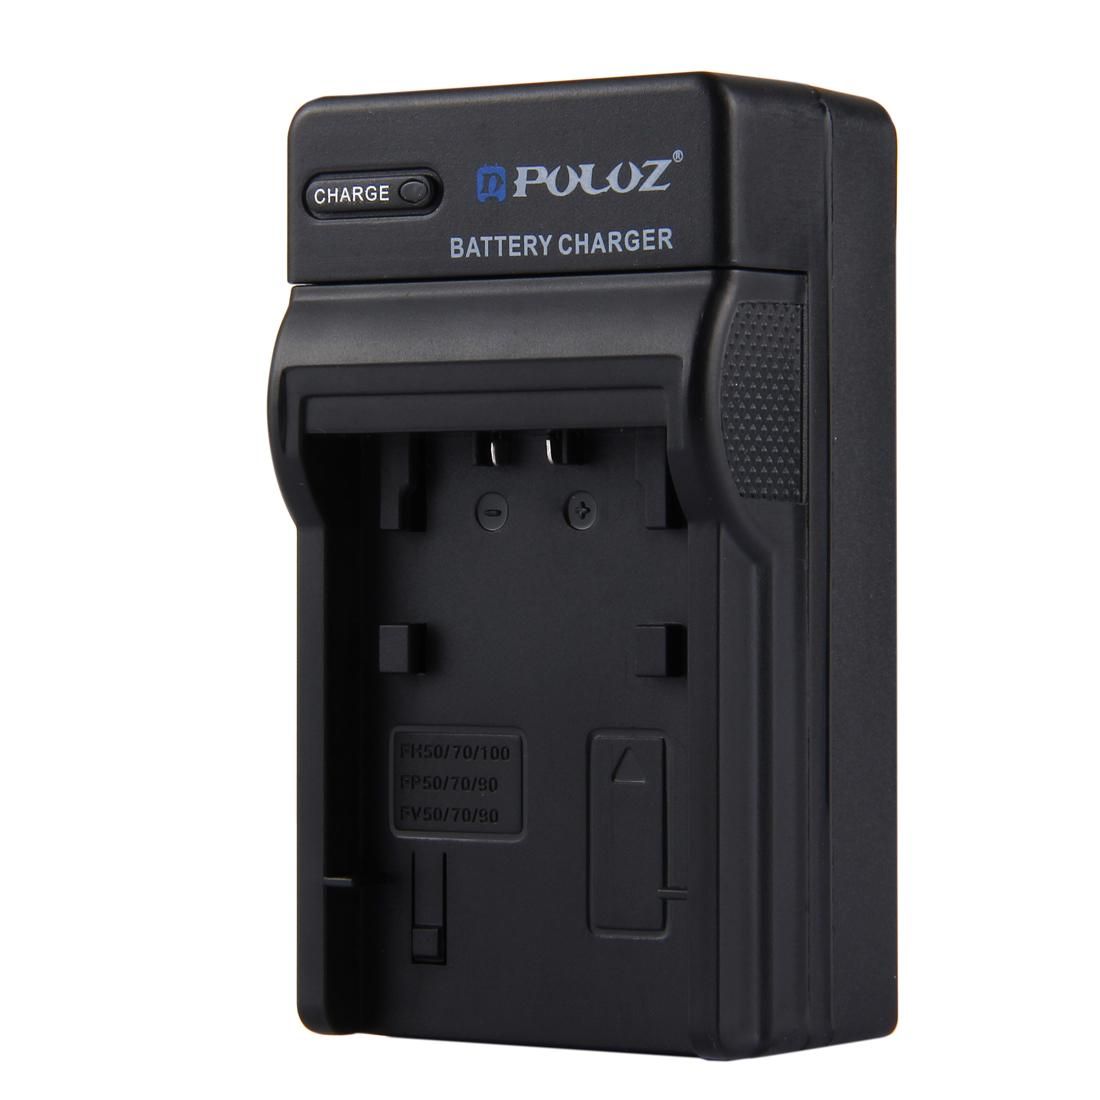 PULUZ US Plug Battery Charger for Sony NP-FH50 / NP-FH70 / NP-FH100 / NP-FP50 / NP-FP70 / NP-FP90 / NP-FV50 / NP-FV70 / NP-FV90 Battery